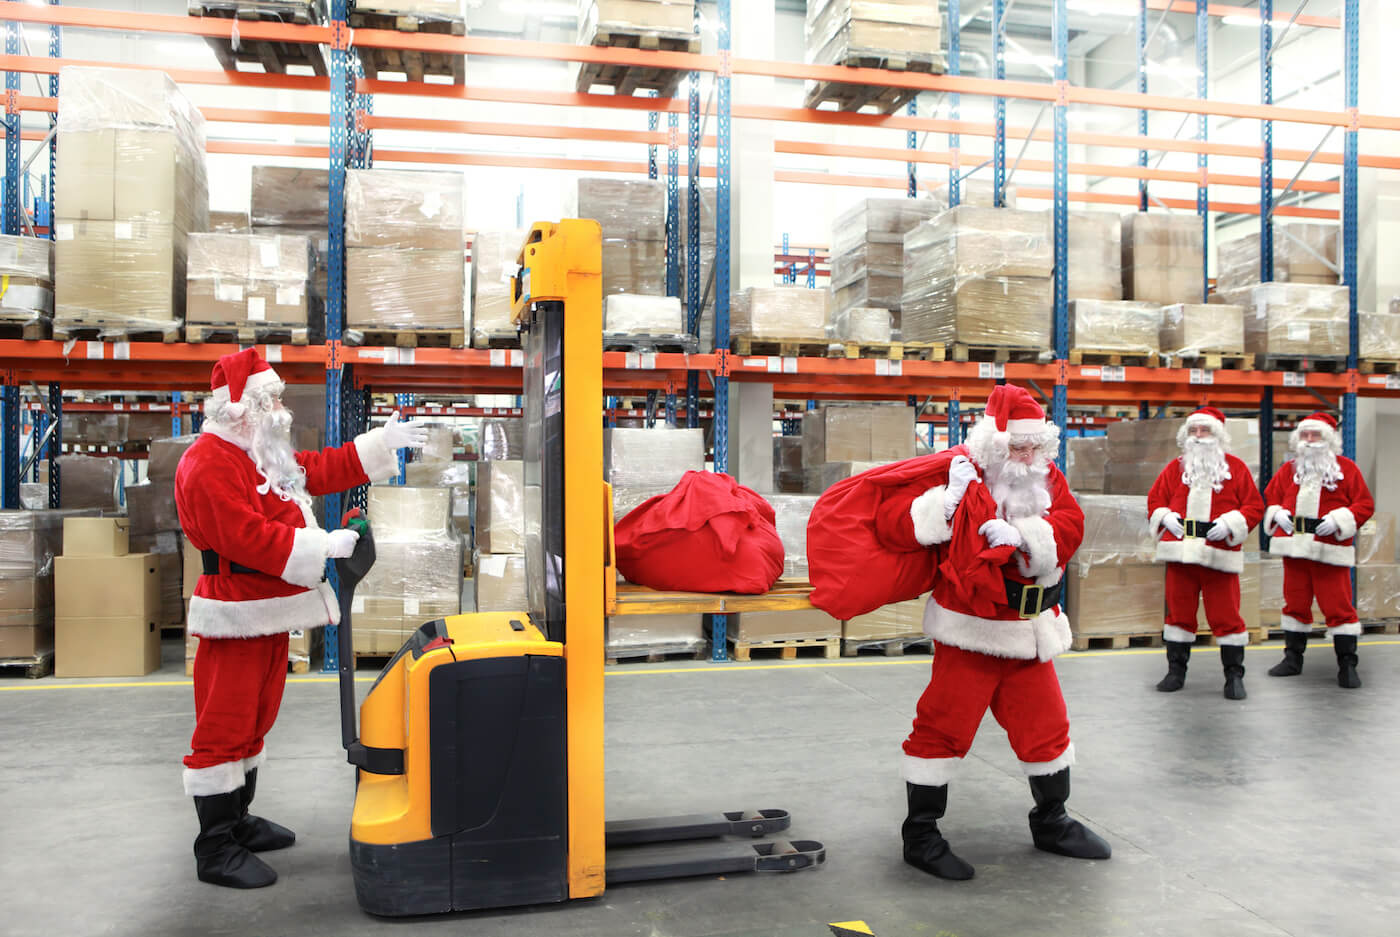 5 Tips to Get Your Warehouse Ready for Peak Season